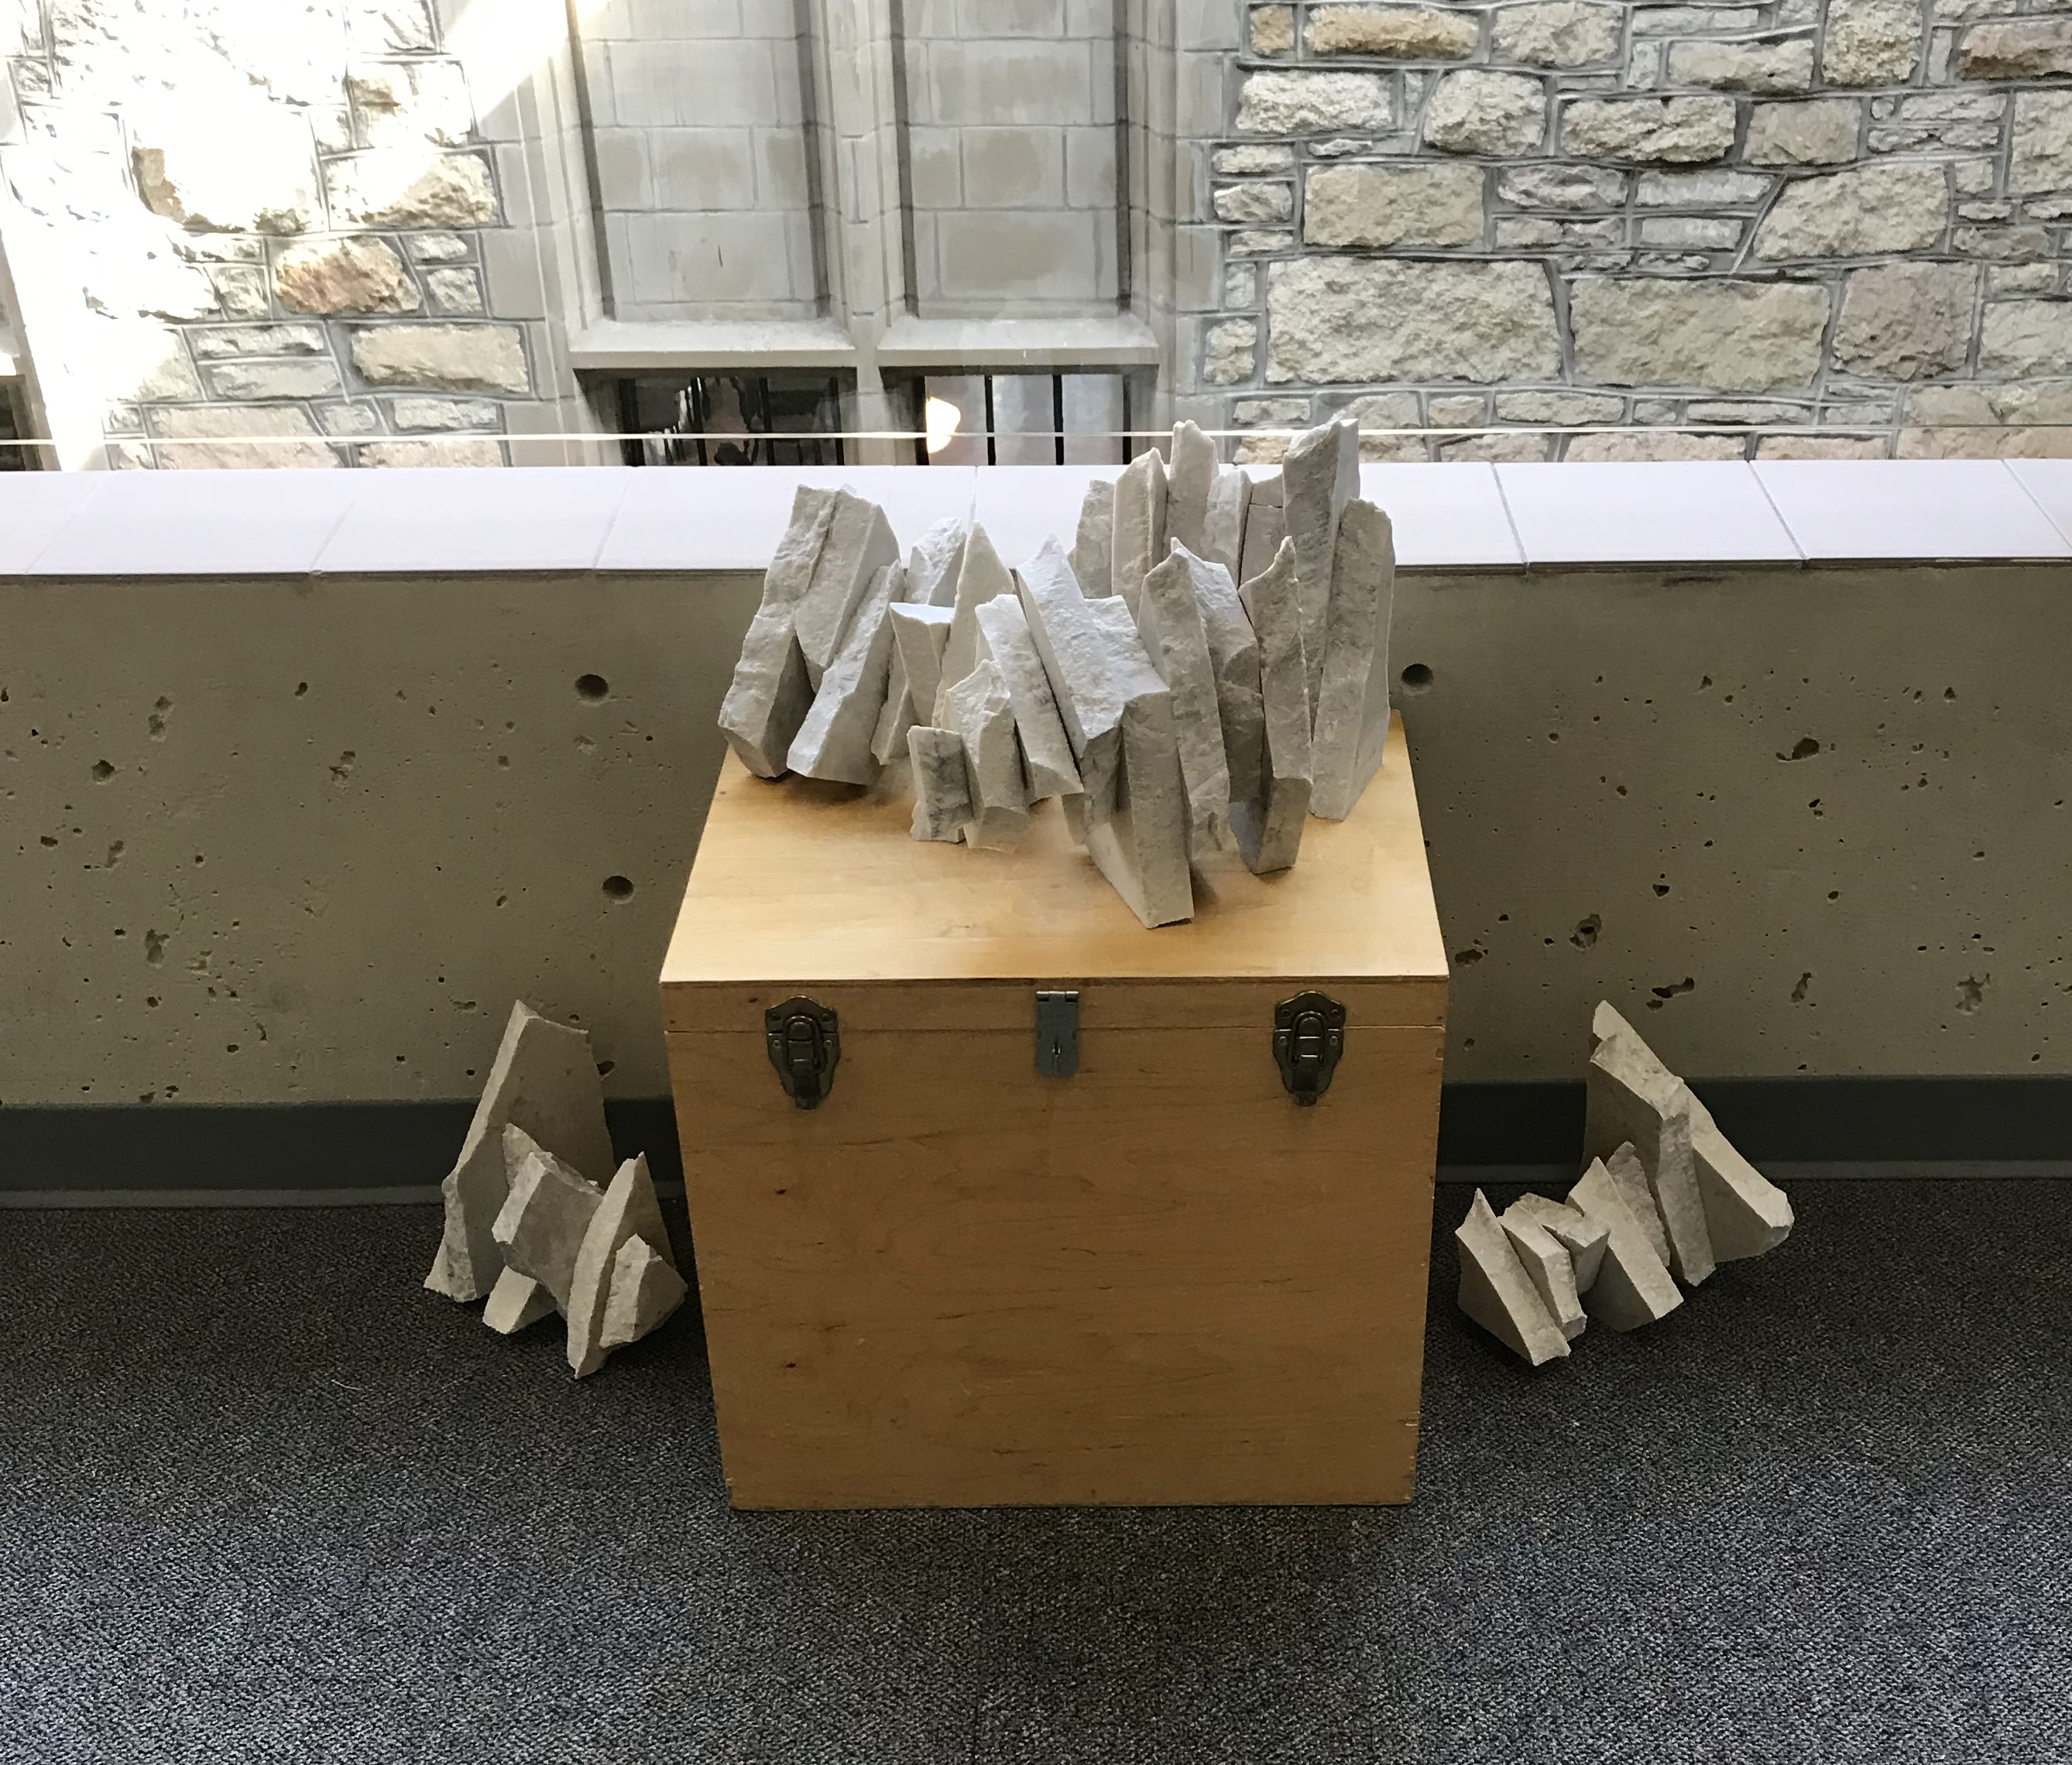 An art project created from discarded and repurposed stone countertops for ARTCycled 2018 by Gloria Simplkins